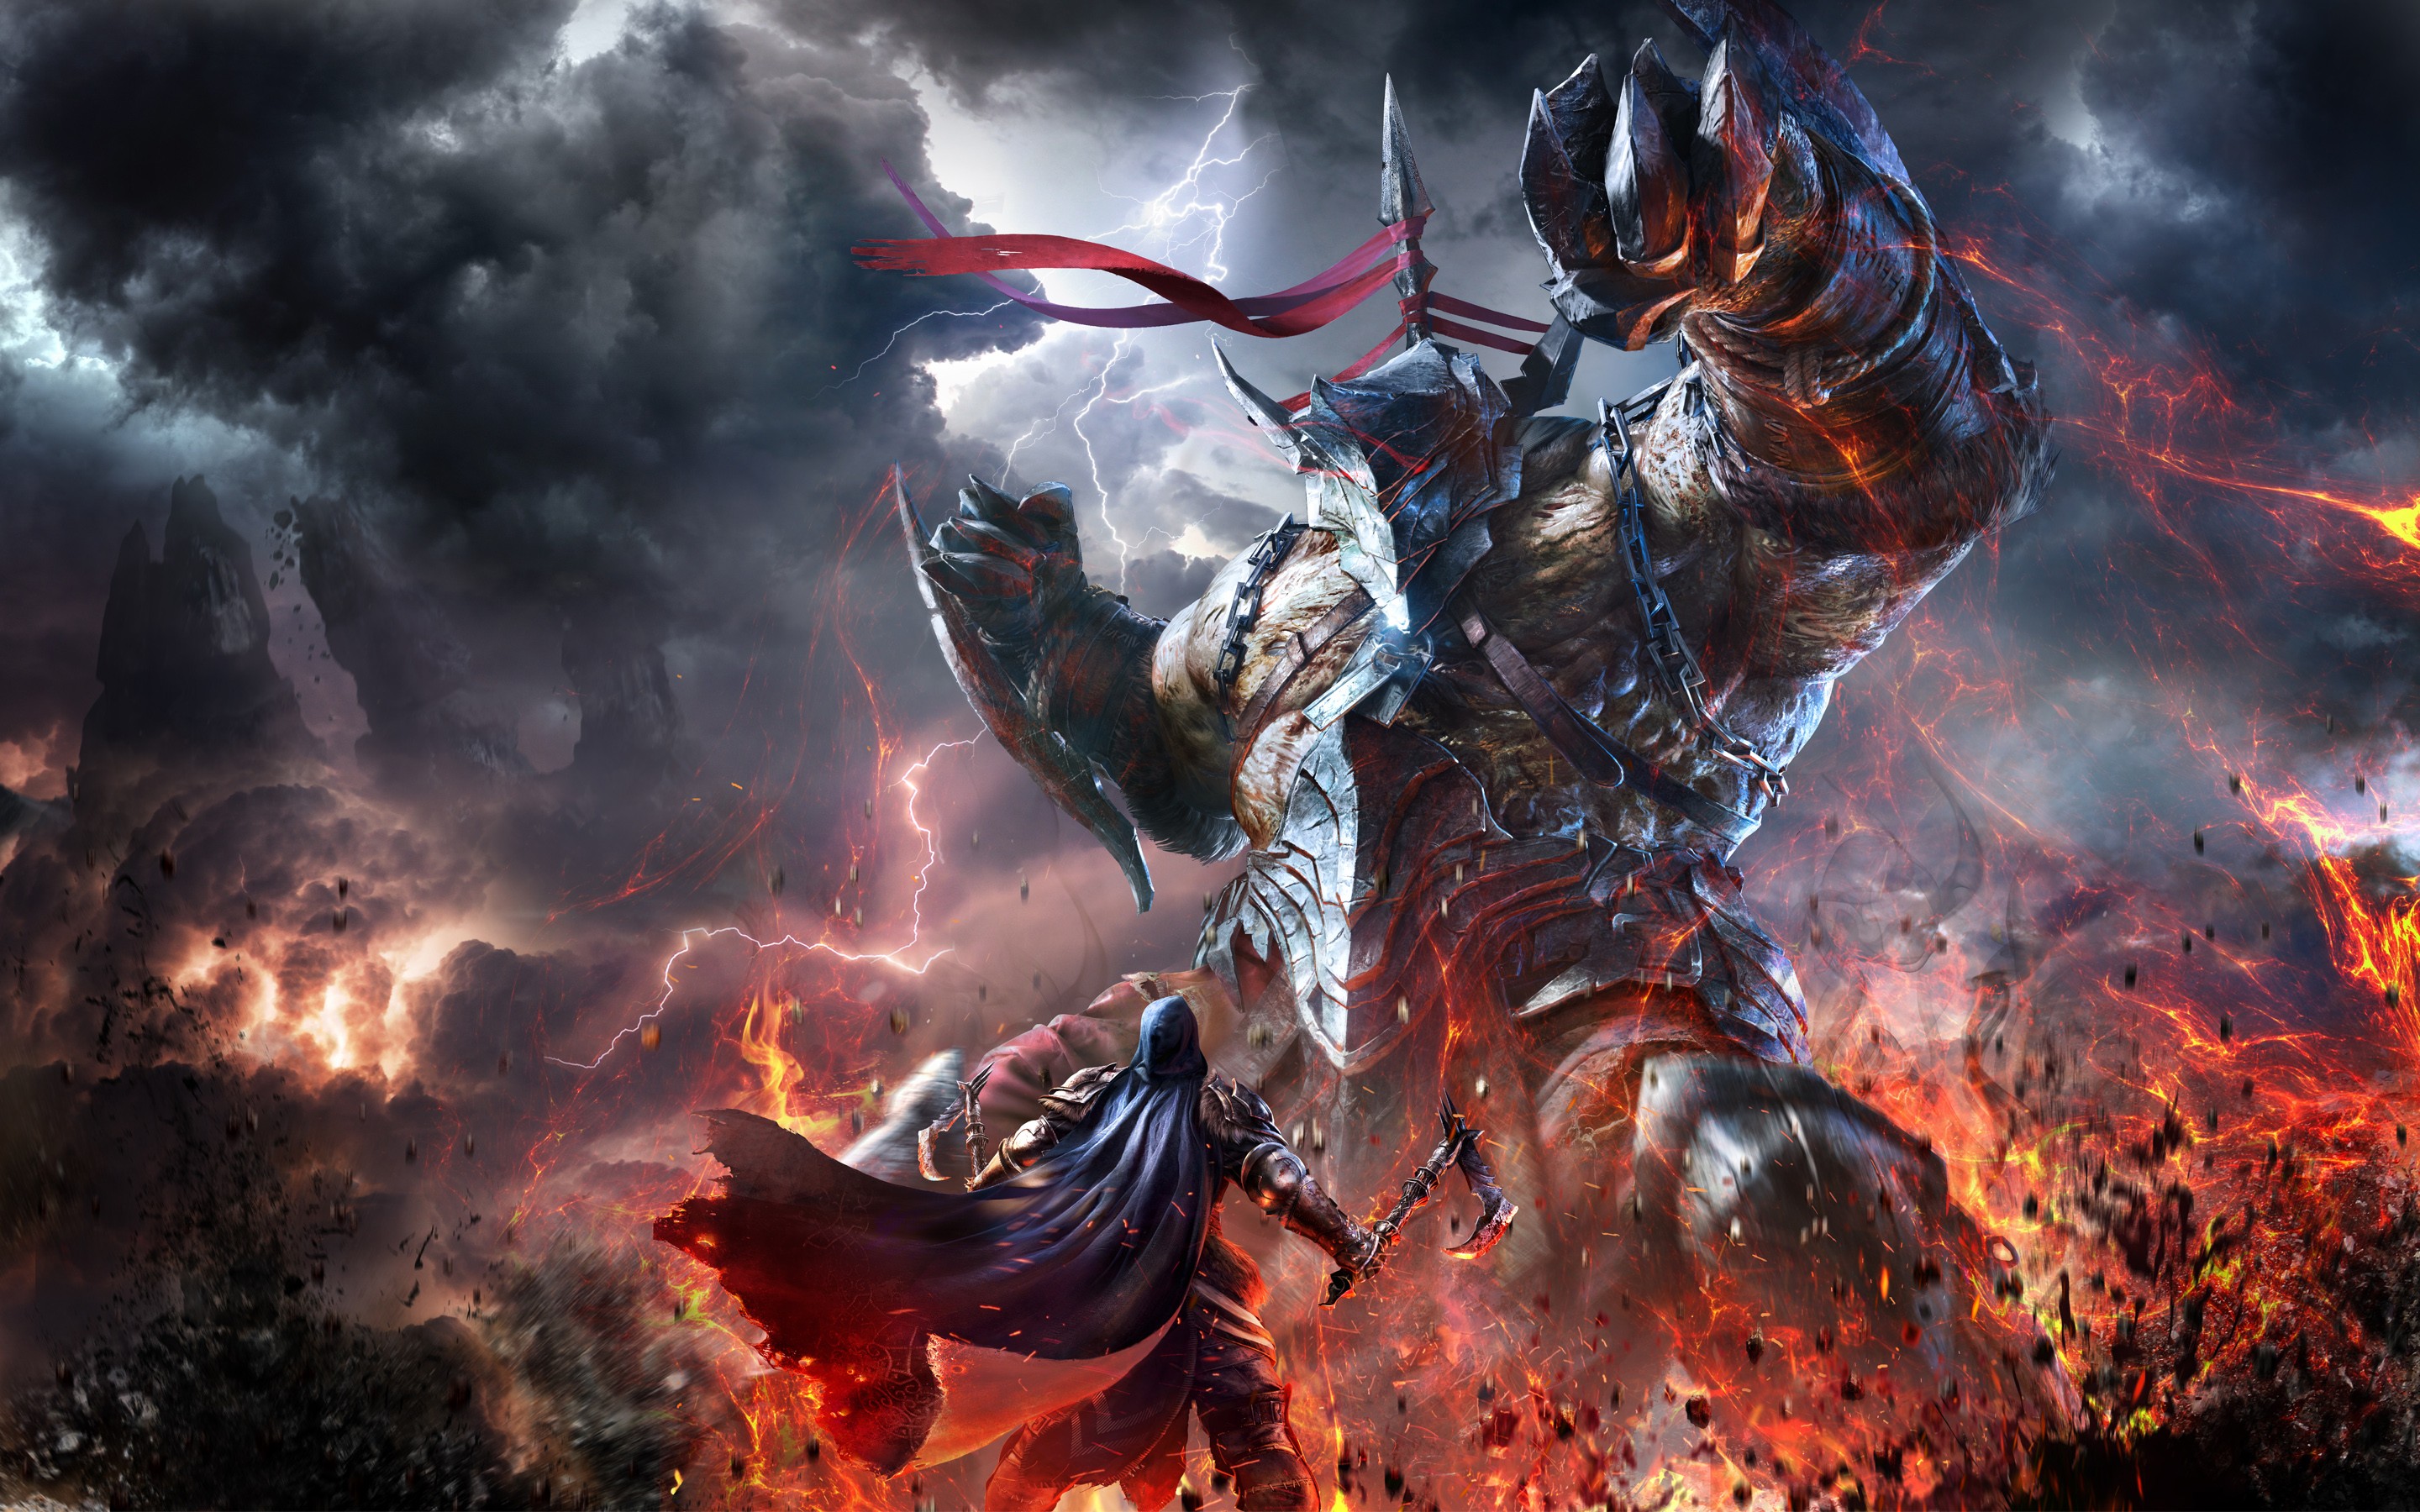 download the last version for android Lords of the Fallen